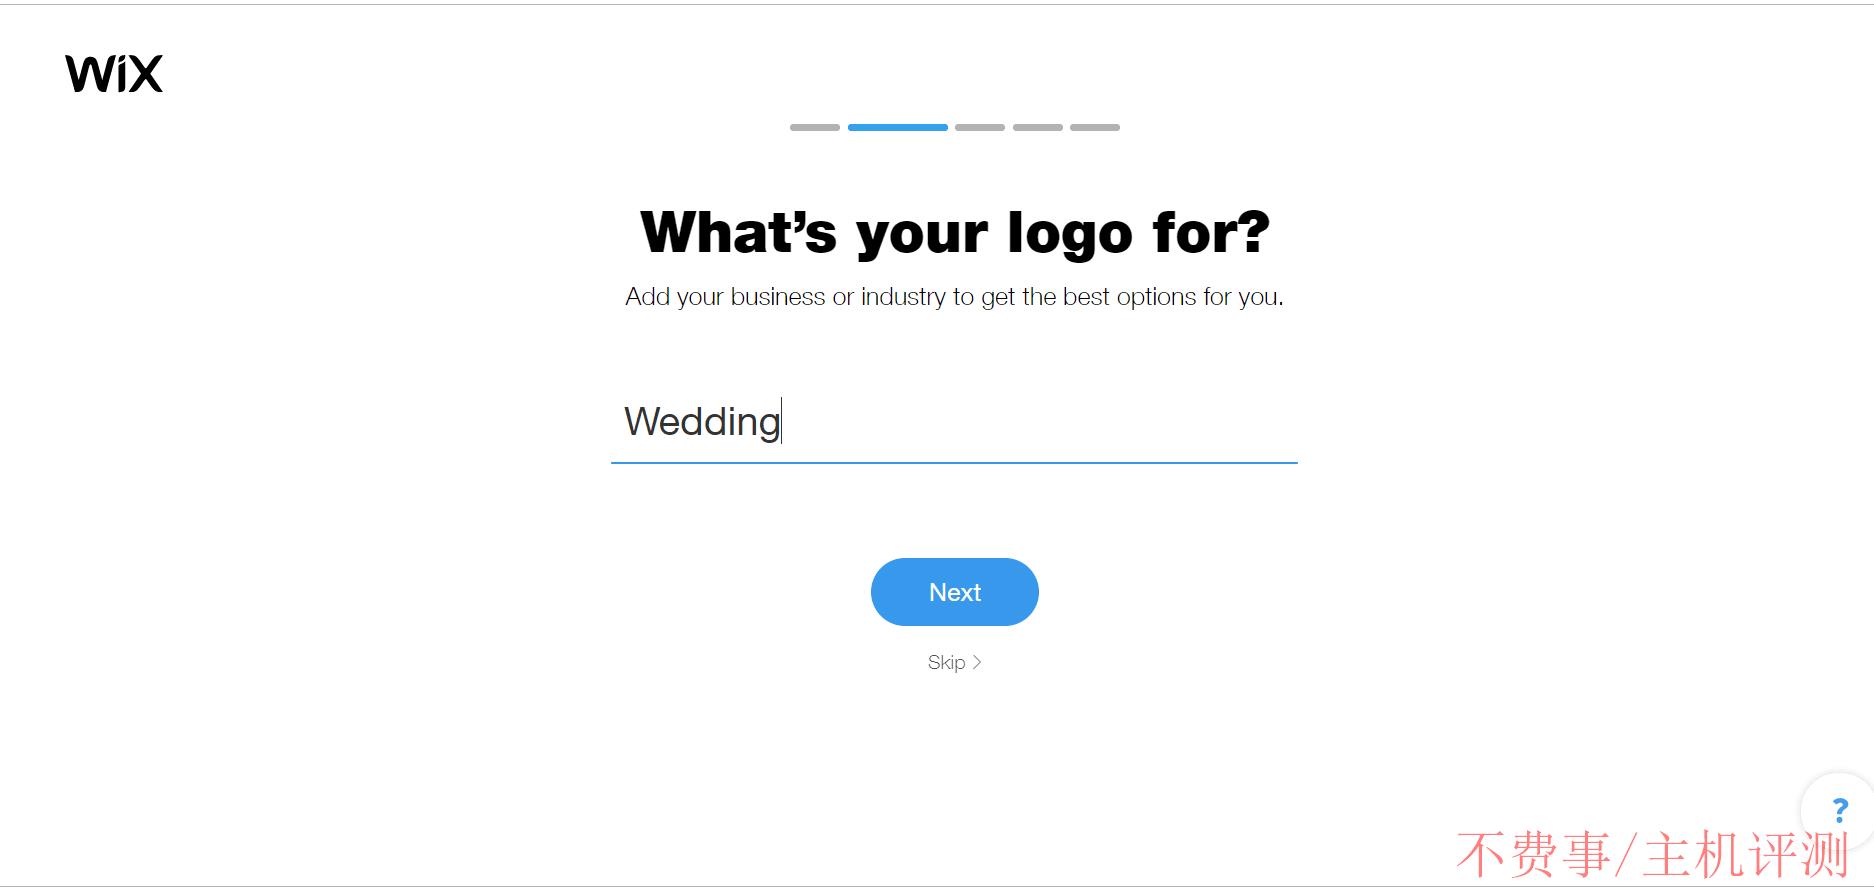 Wix Logo Maker screenshot - What's your logo for?